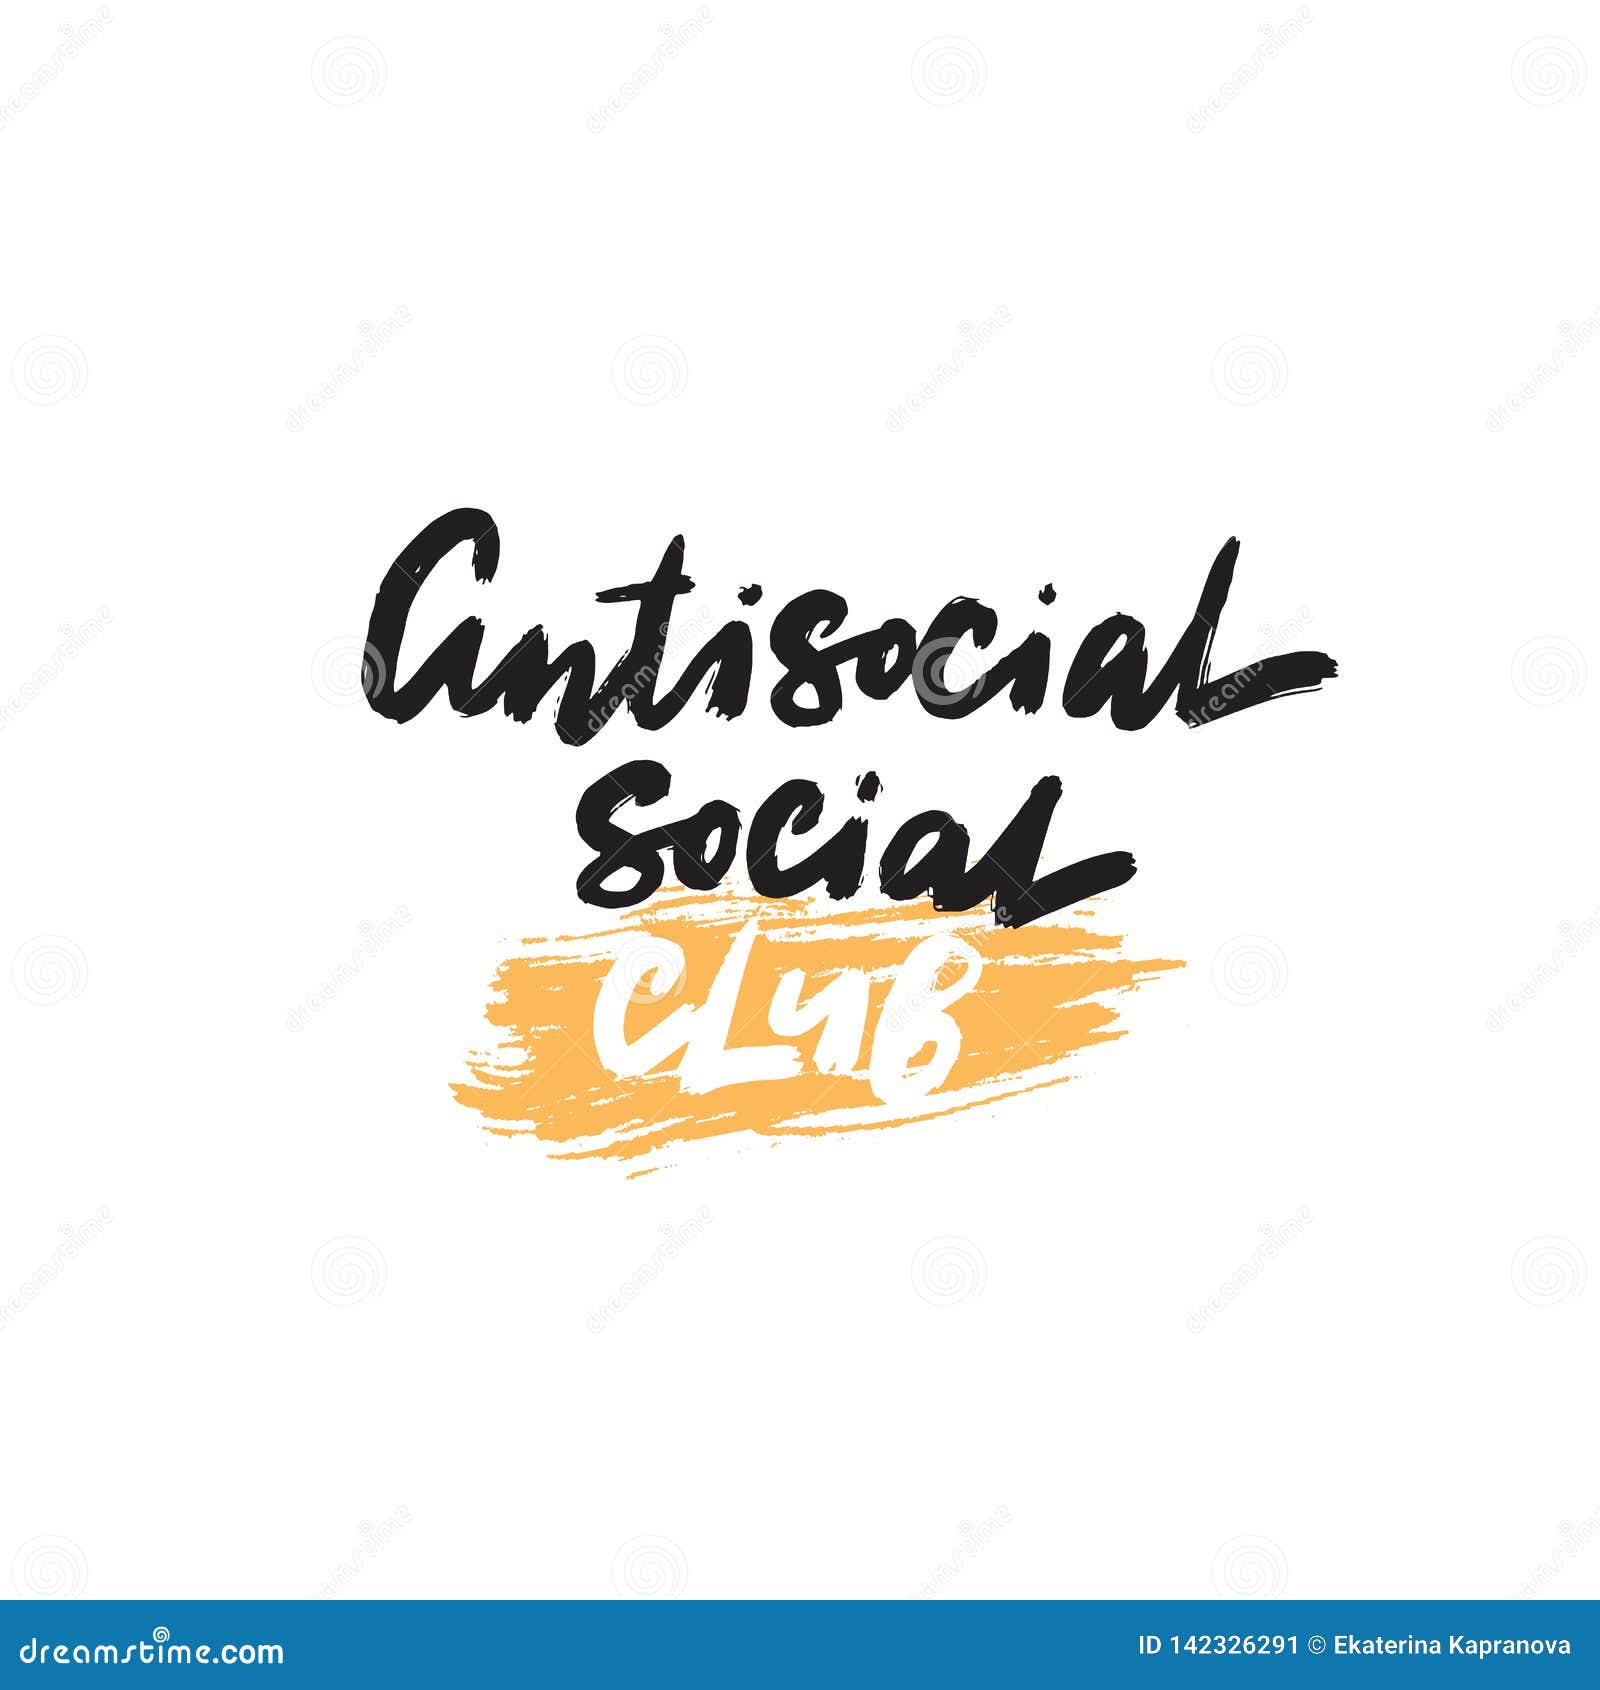 antisocial social club. funny quote.